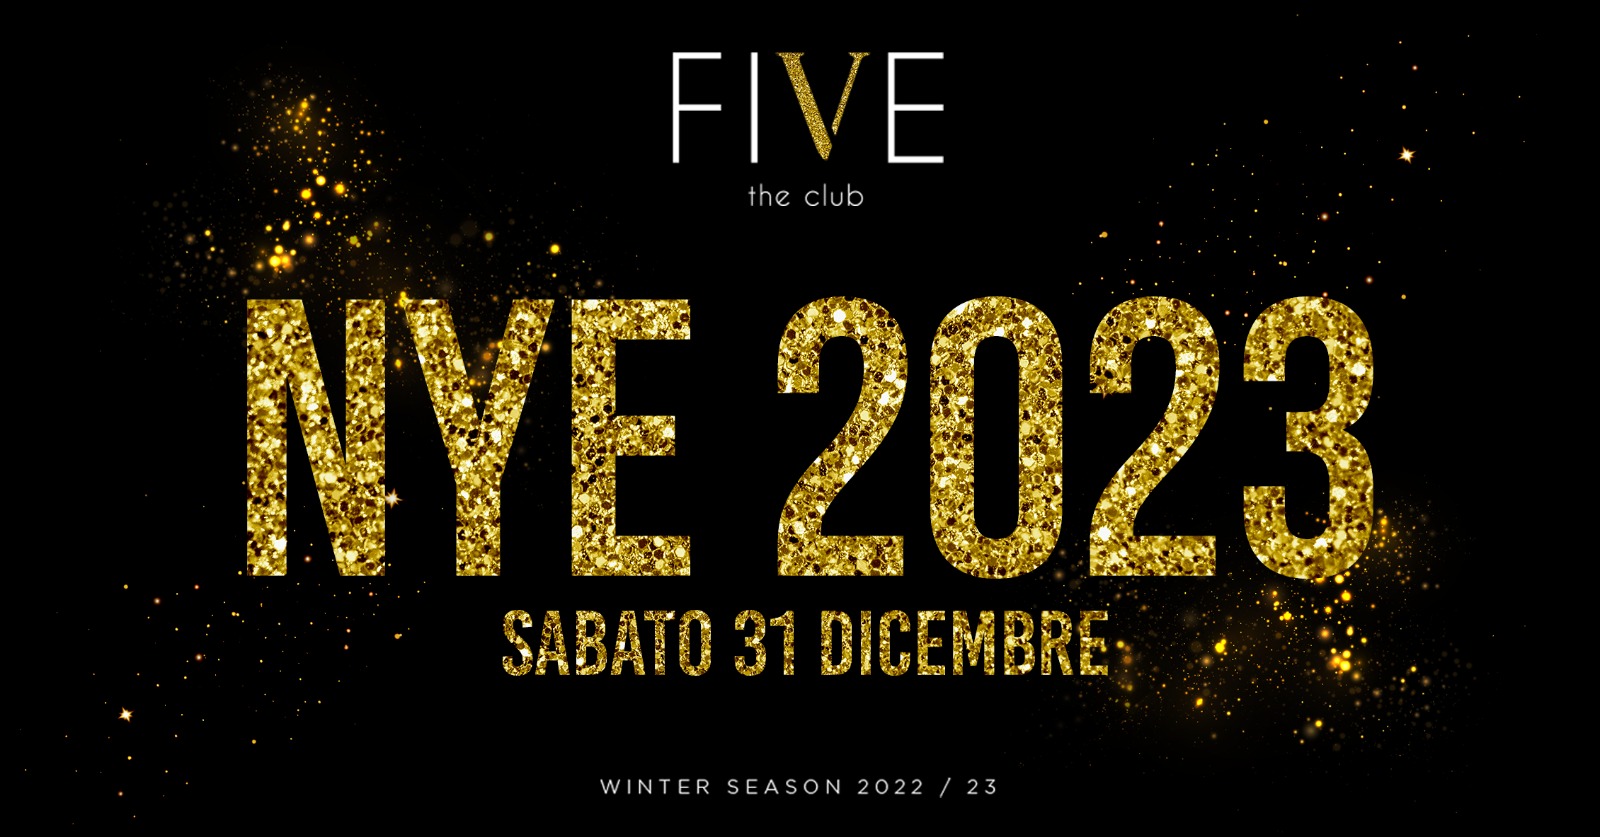 FIVE-UDINE-NEW YEAR PARTY